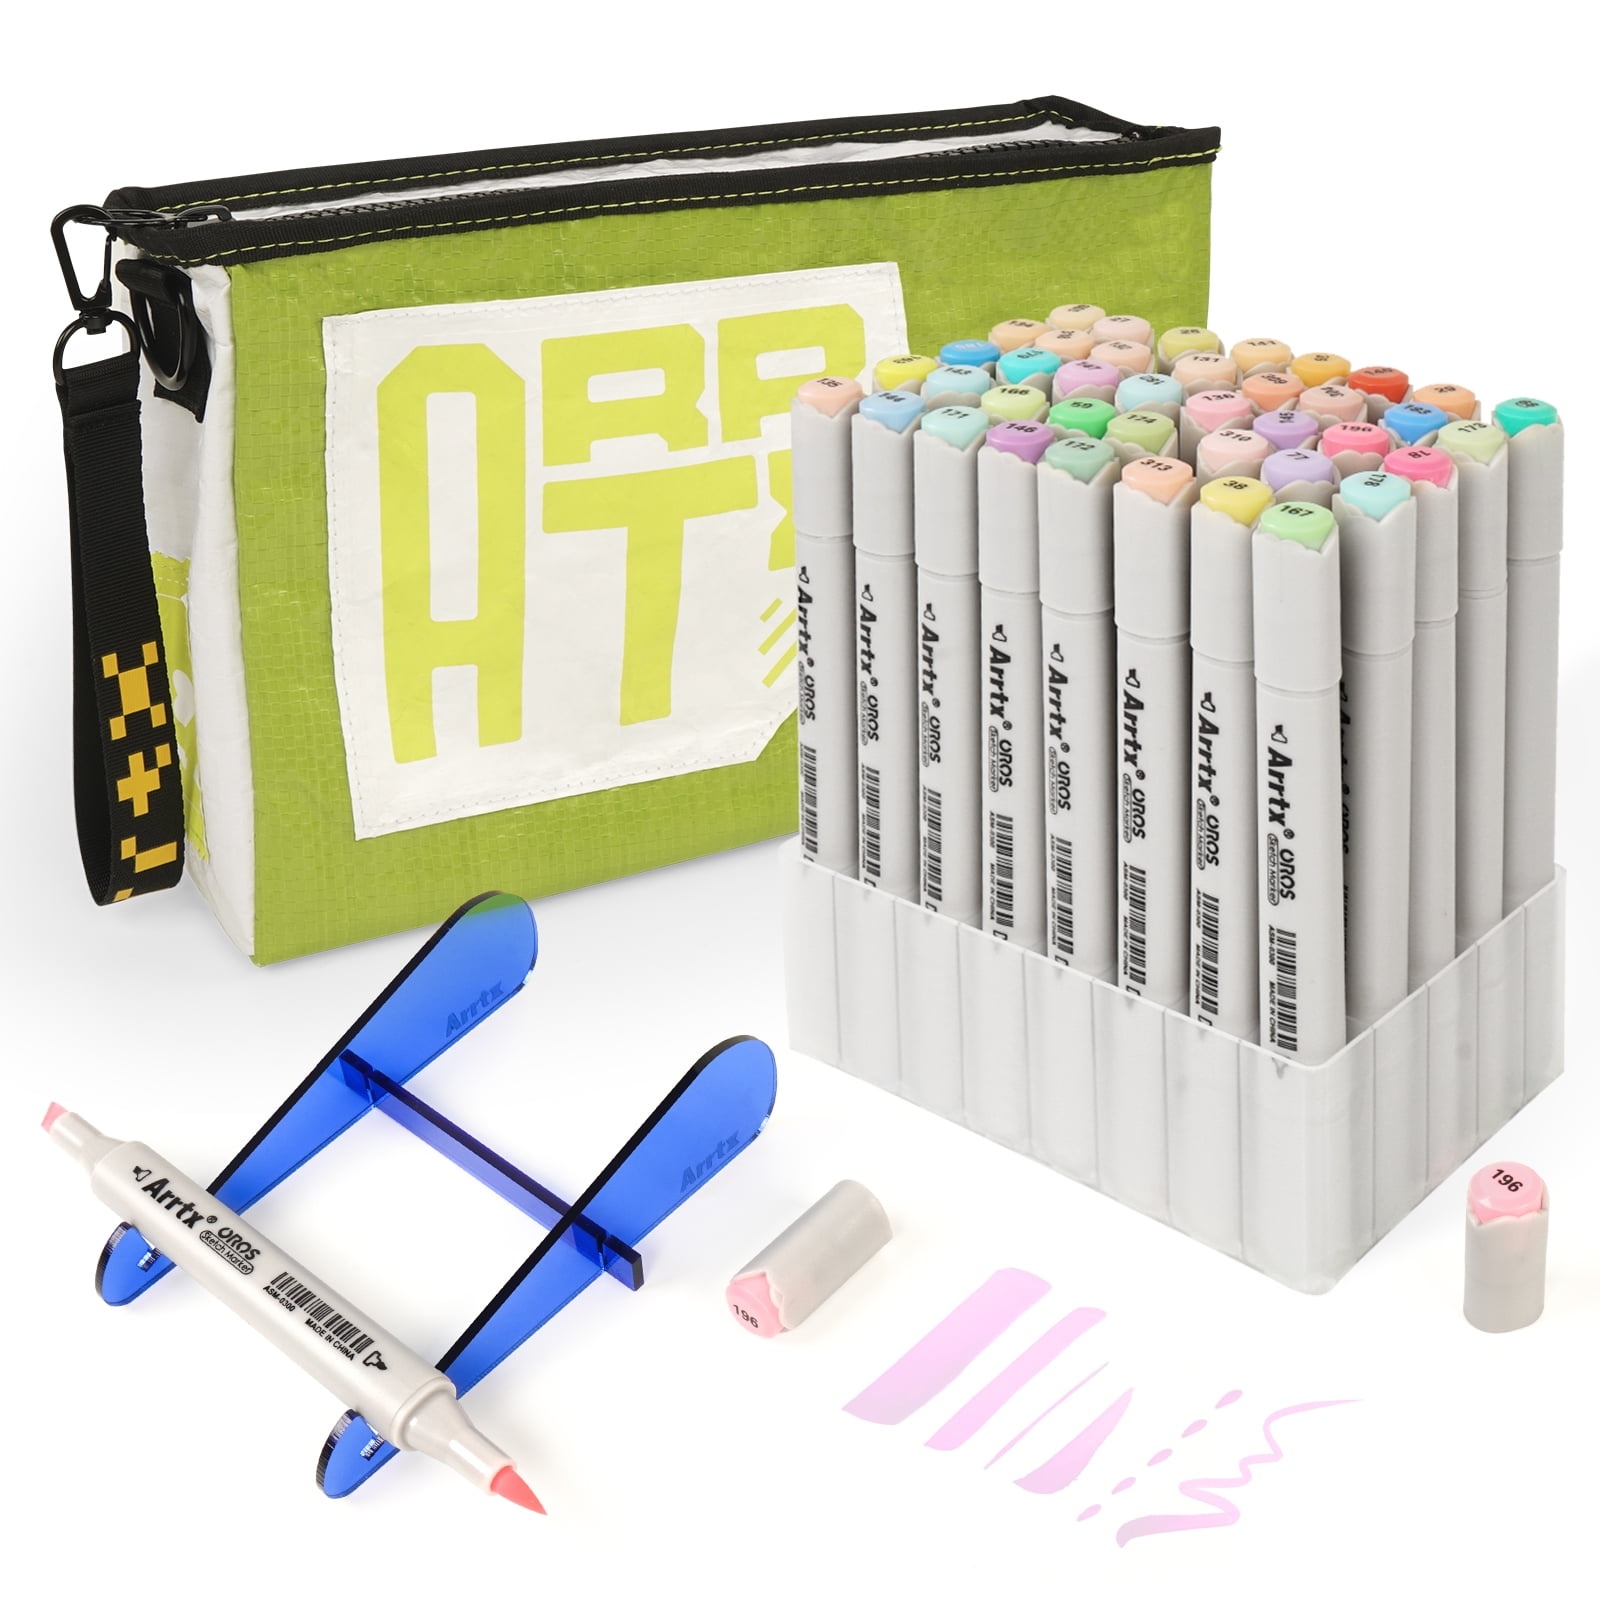  Arrtx Pastel Markers OROS 24 Colors,Alcohol Based